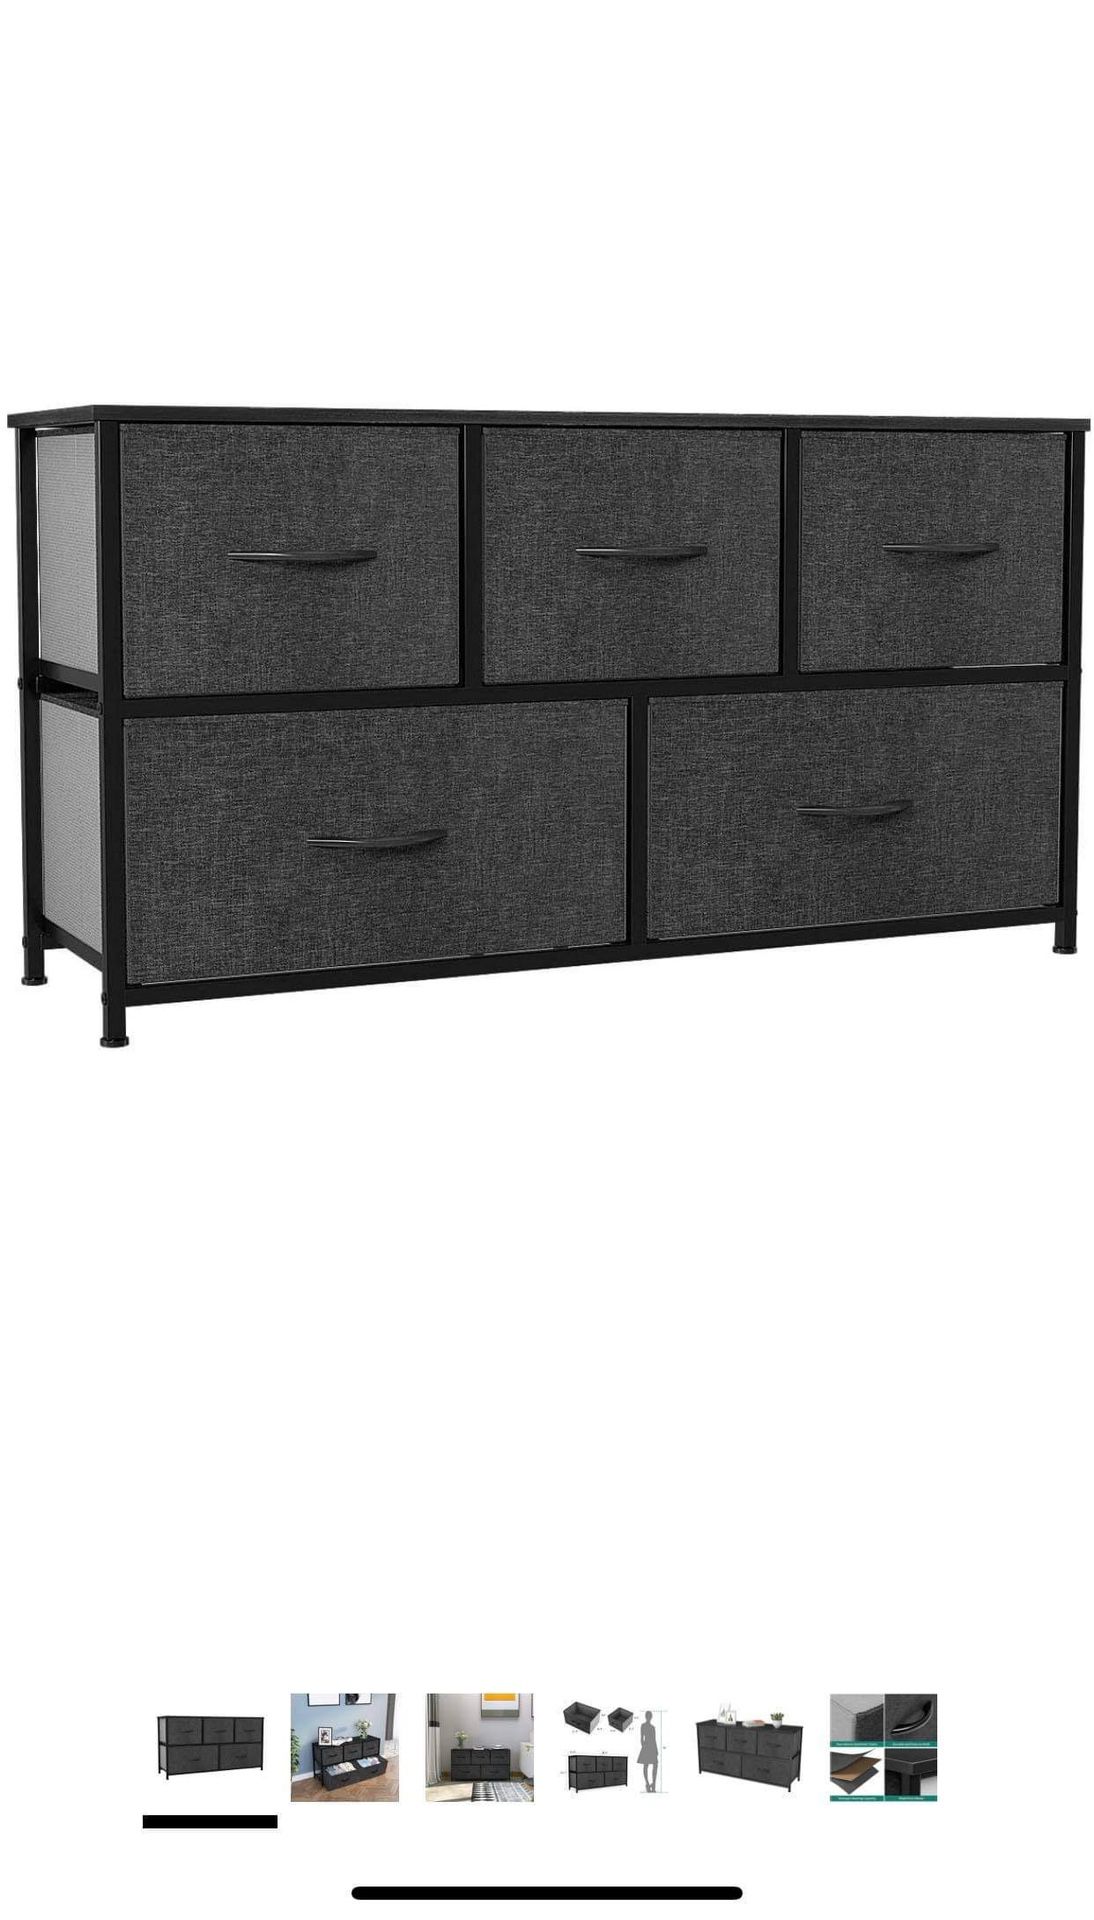 Wide Storage Tower with 5 Drawers - Fabric Dresser, Organizer Unit for Bedroom, Living Room, Closets & Nursery - Sturdy Steel Frame, Easy Pull Fabric 